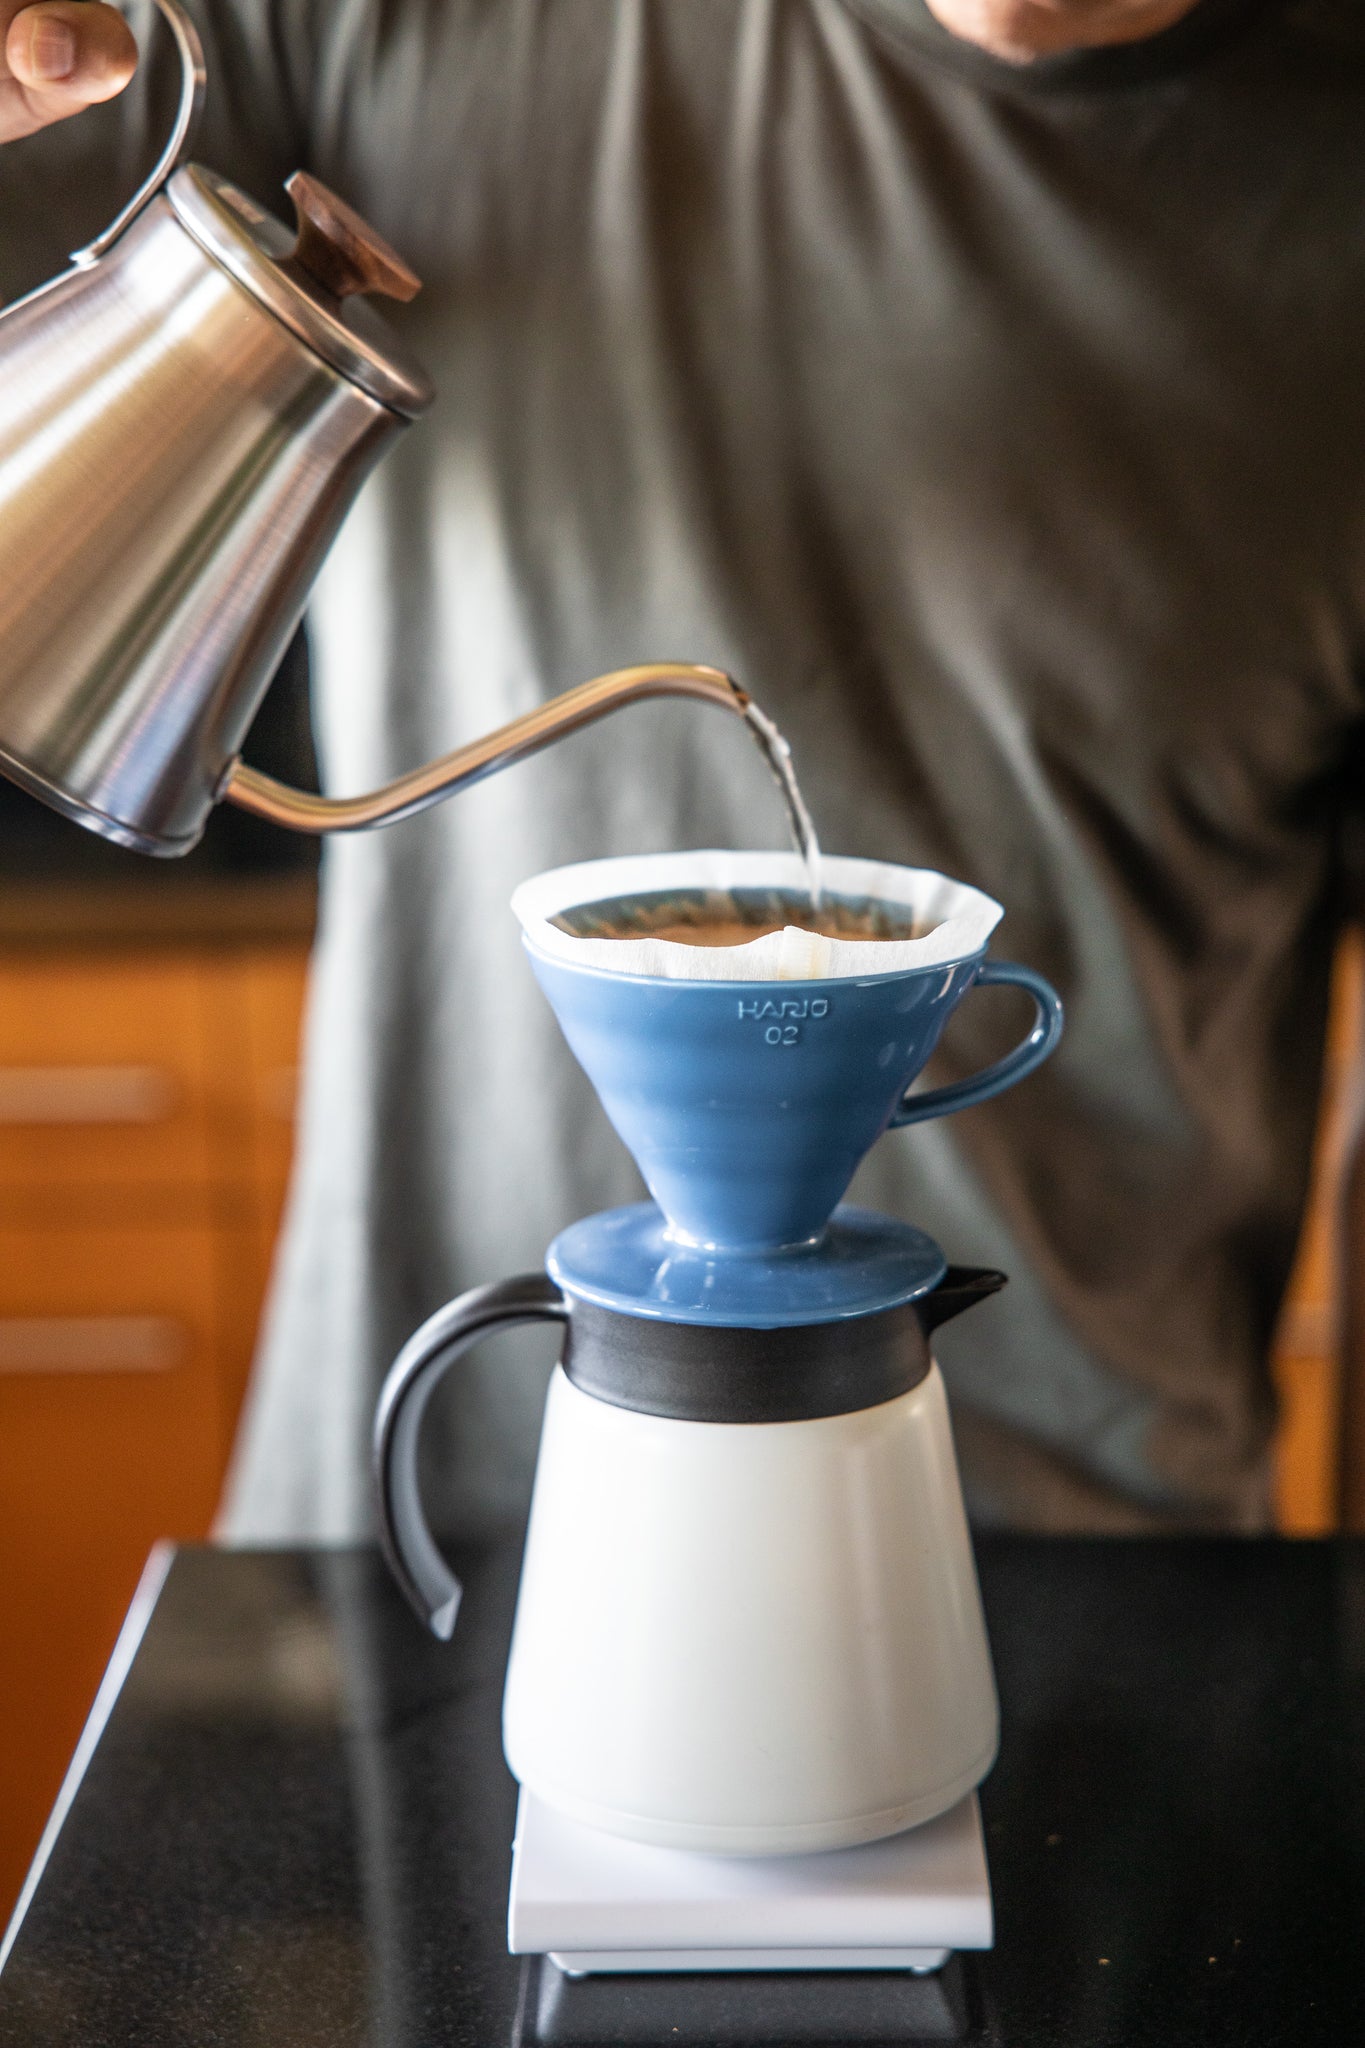 Pour Over Coffee Dripper - V60 Pour-Over Coffee | EspressoWorks Red